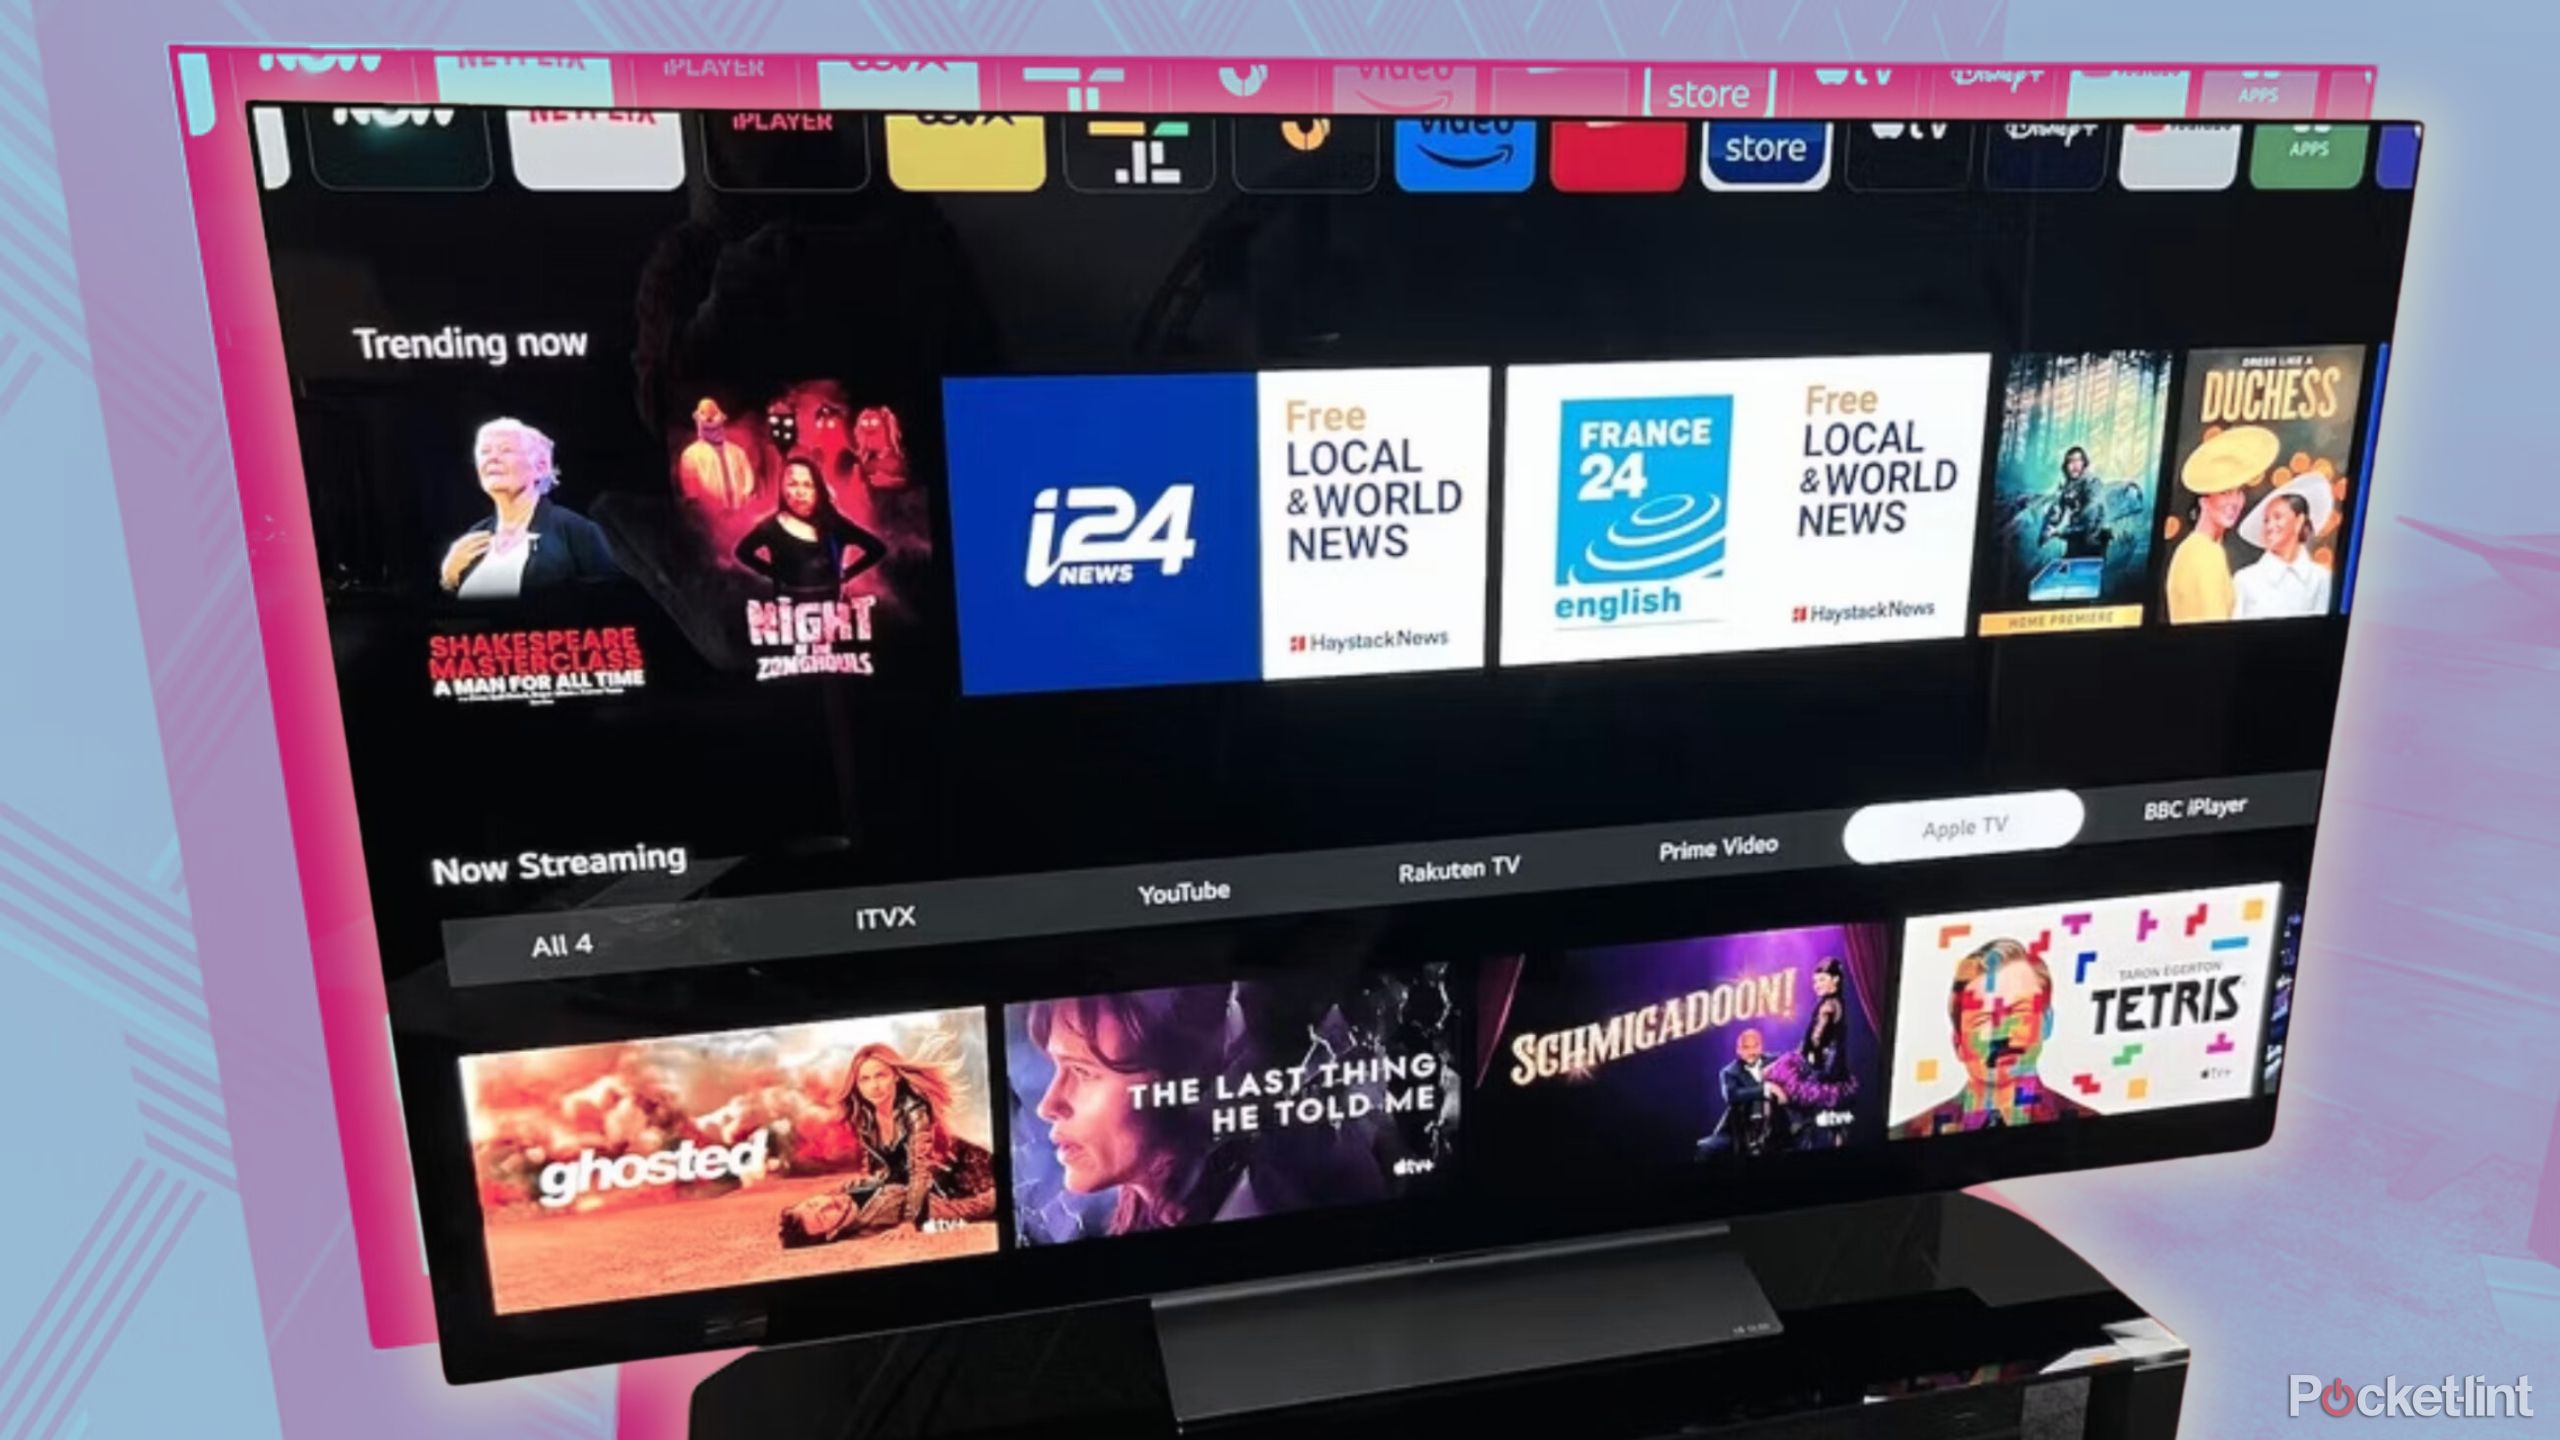 OLED TV featuring channels and trending now shows